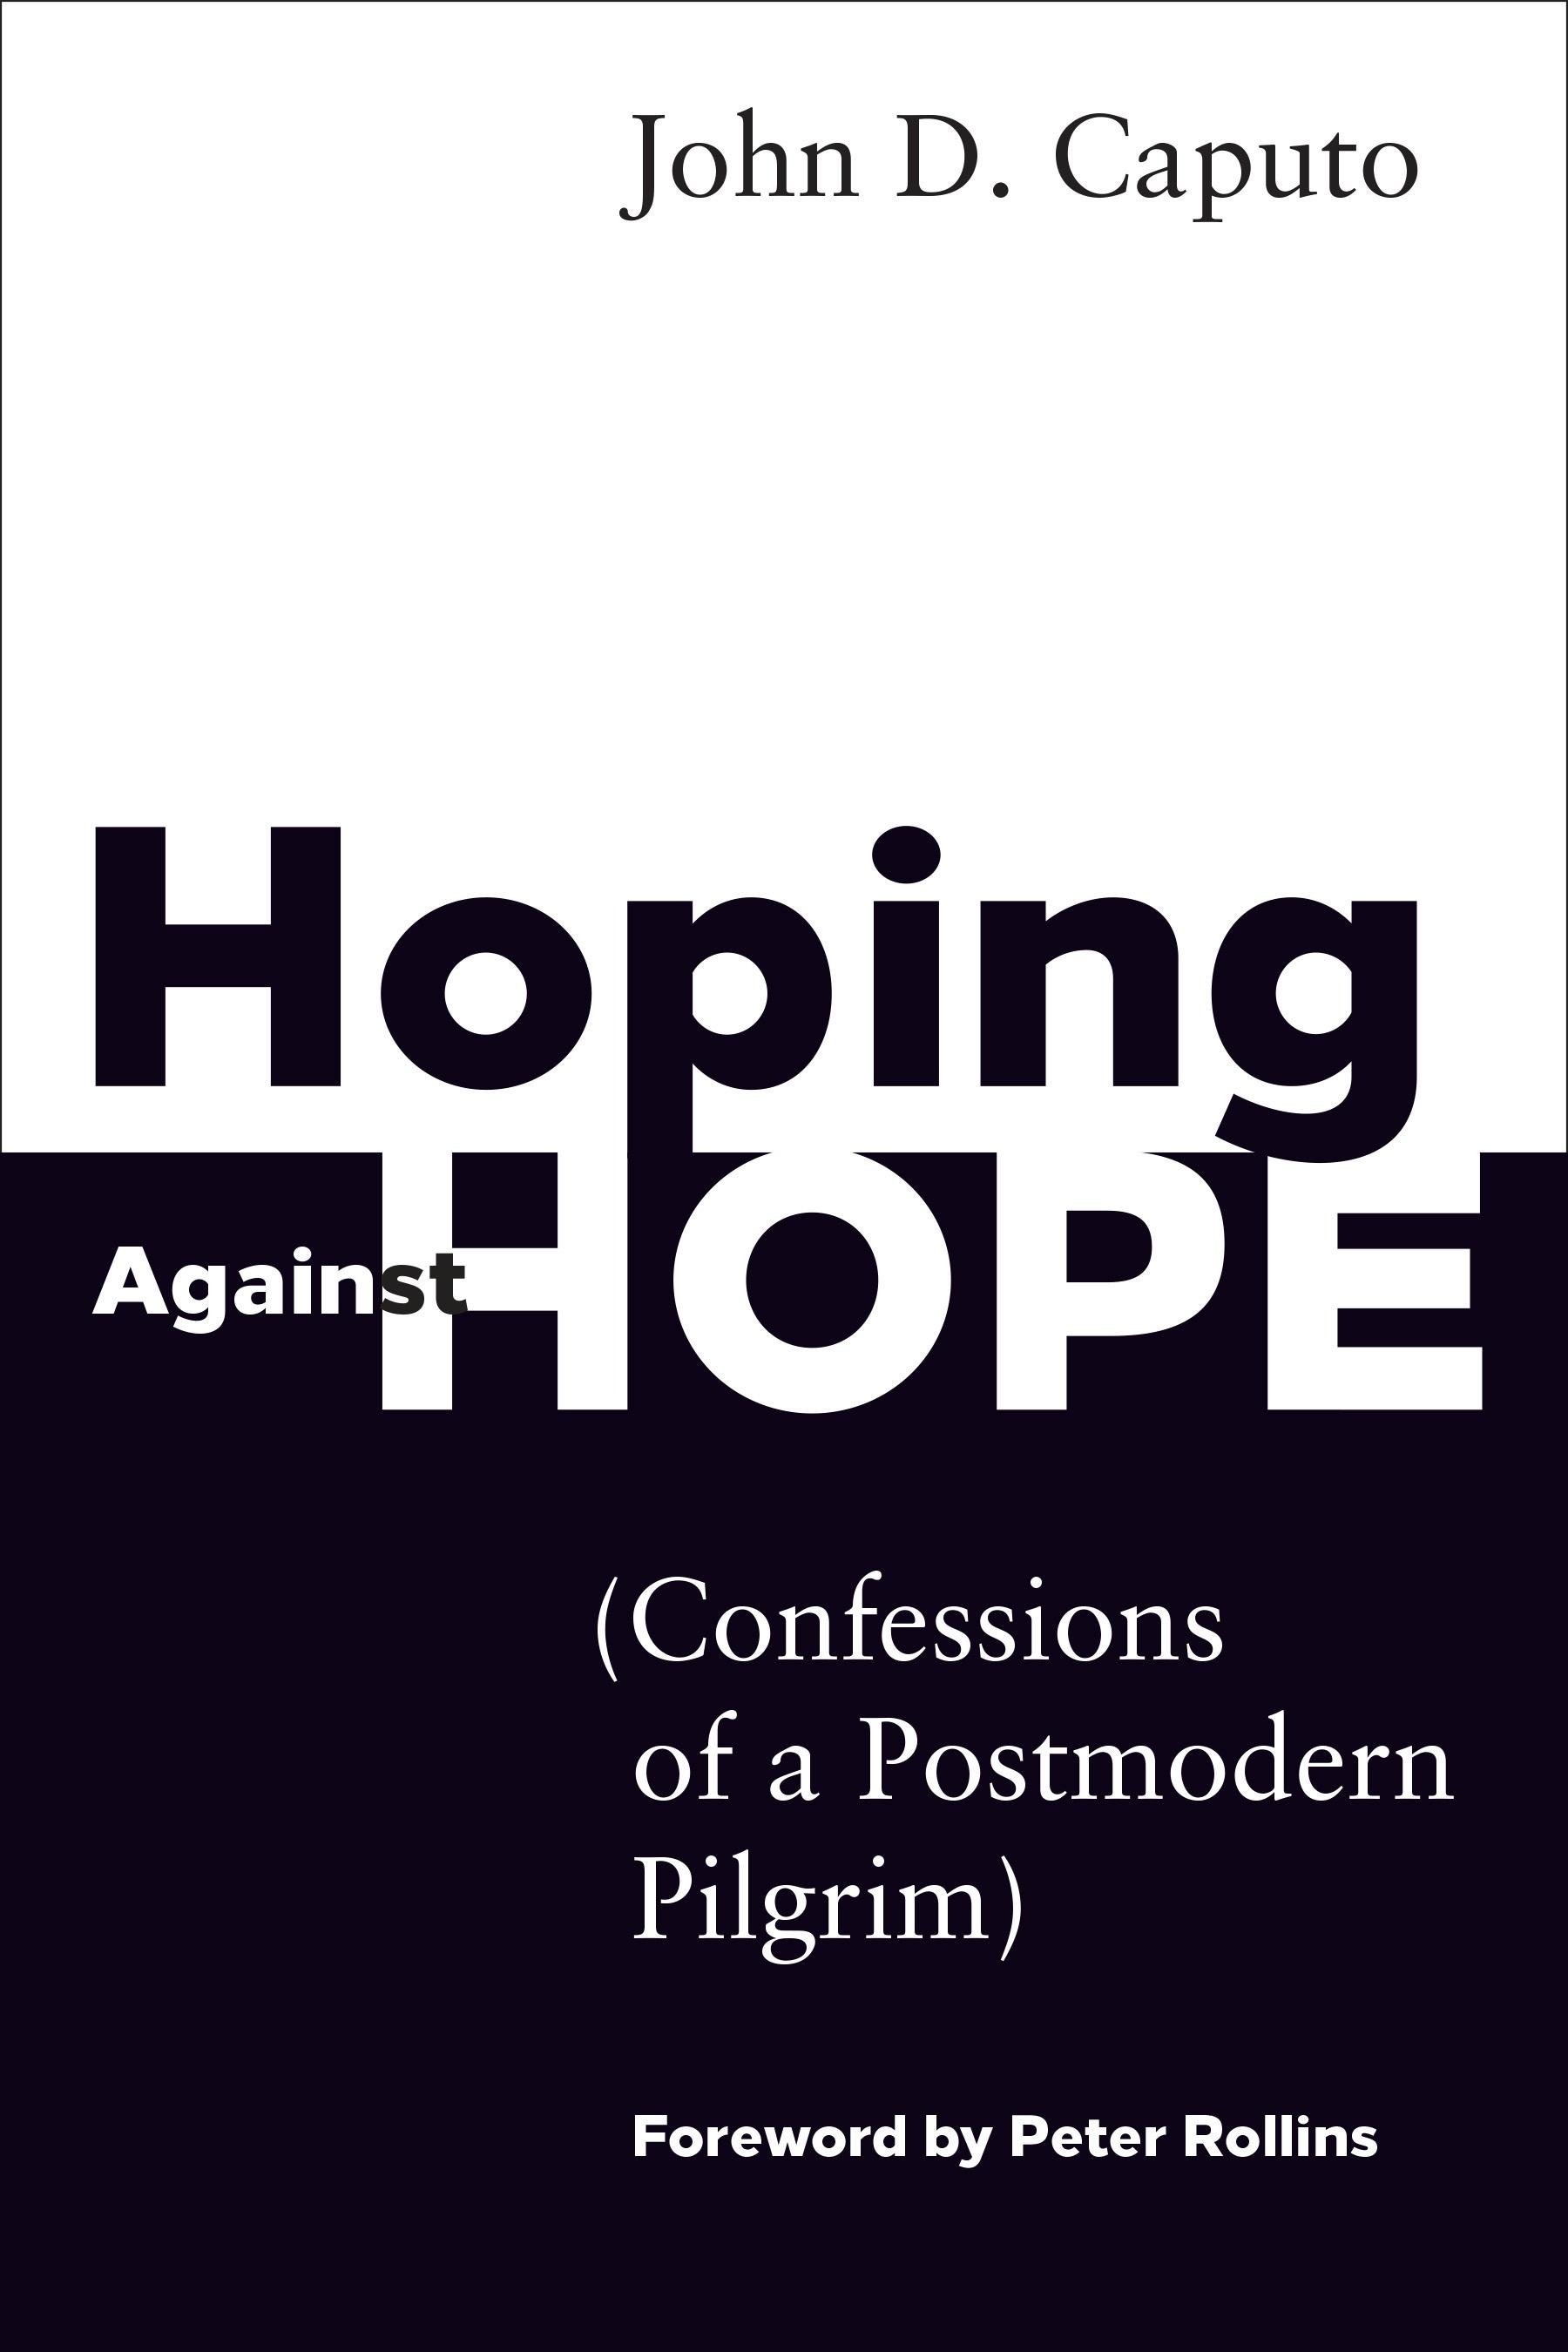 Hoping Against Hope: Confessions of a Postmodern Pilgrim